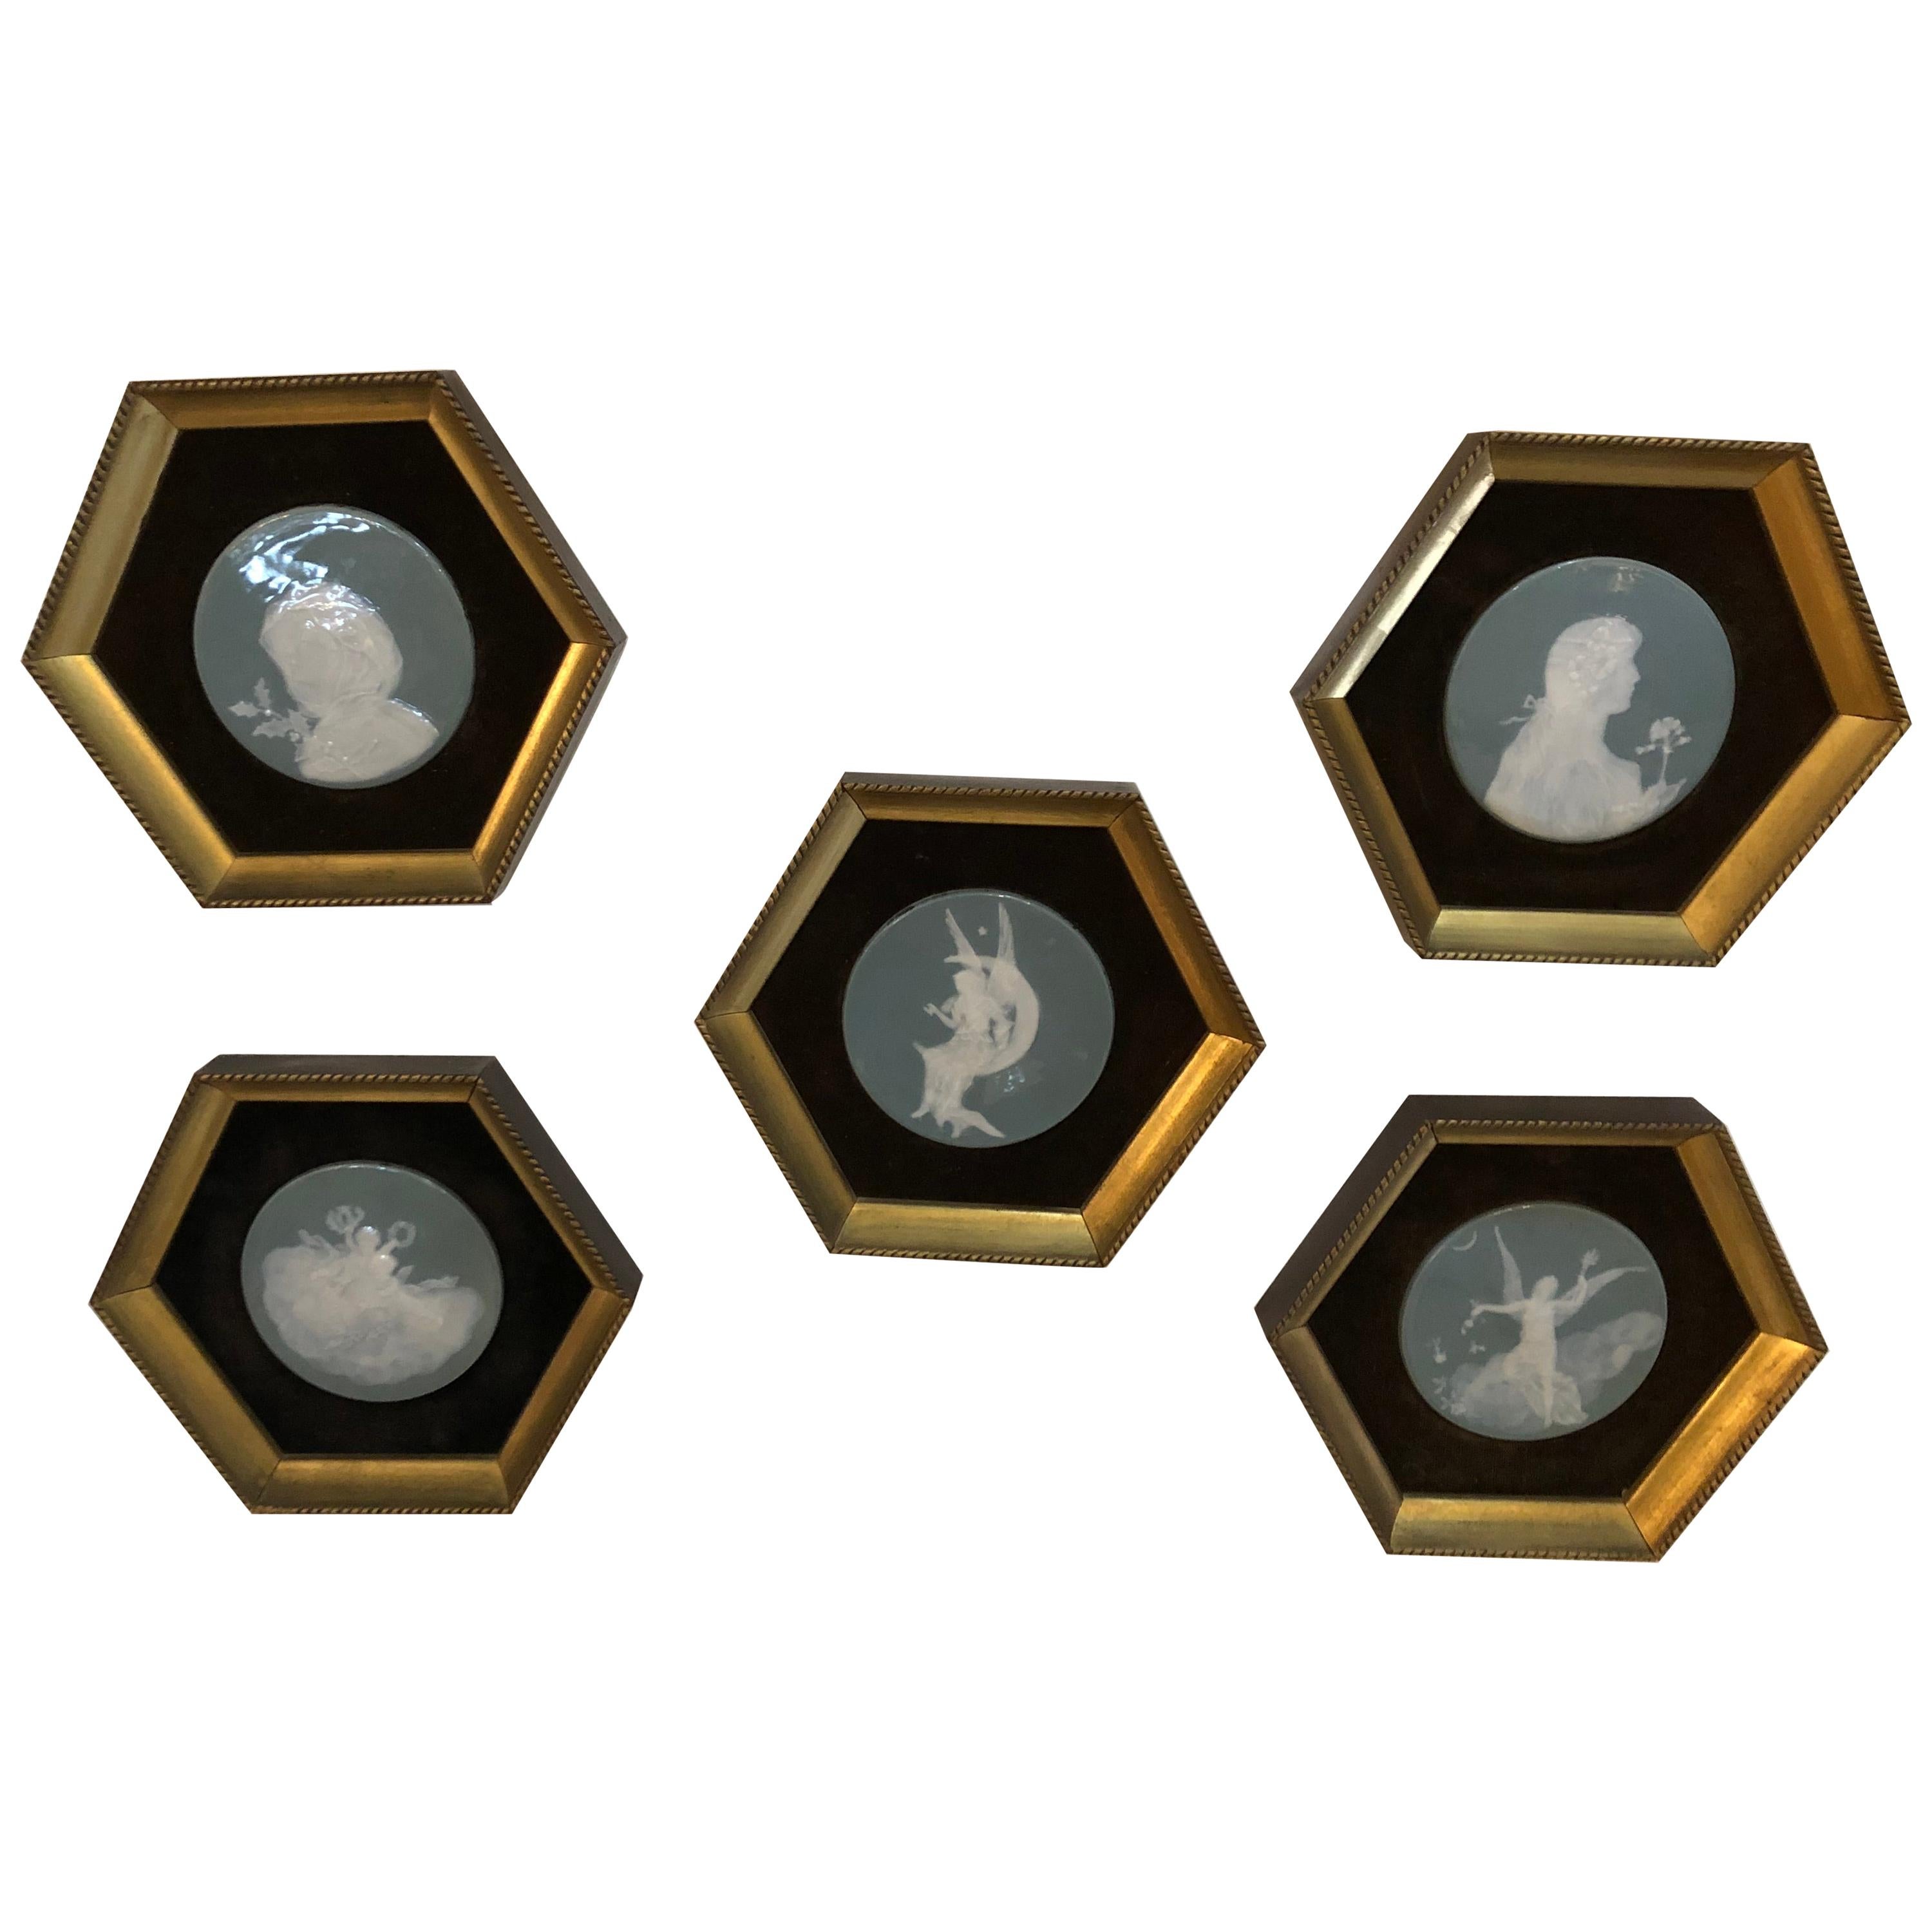 Framed Set of 5 Pastel Blue and White Medallions in Pate Sur Pate Style